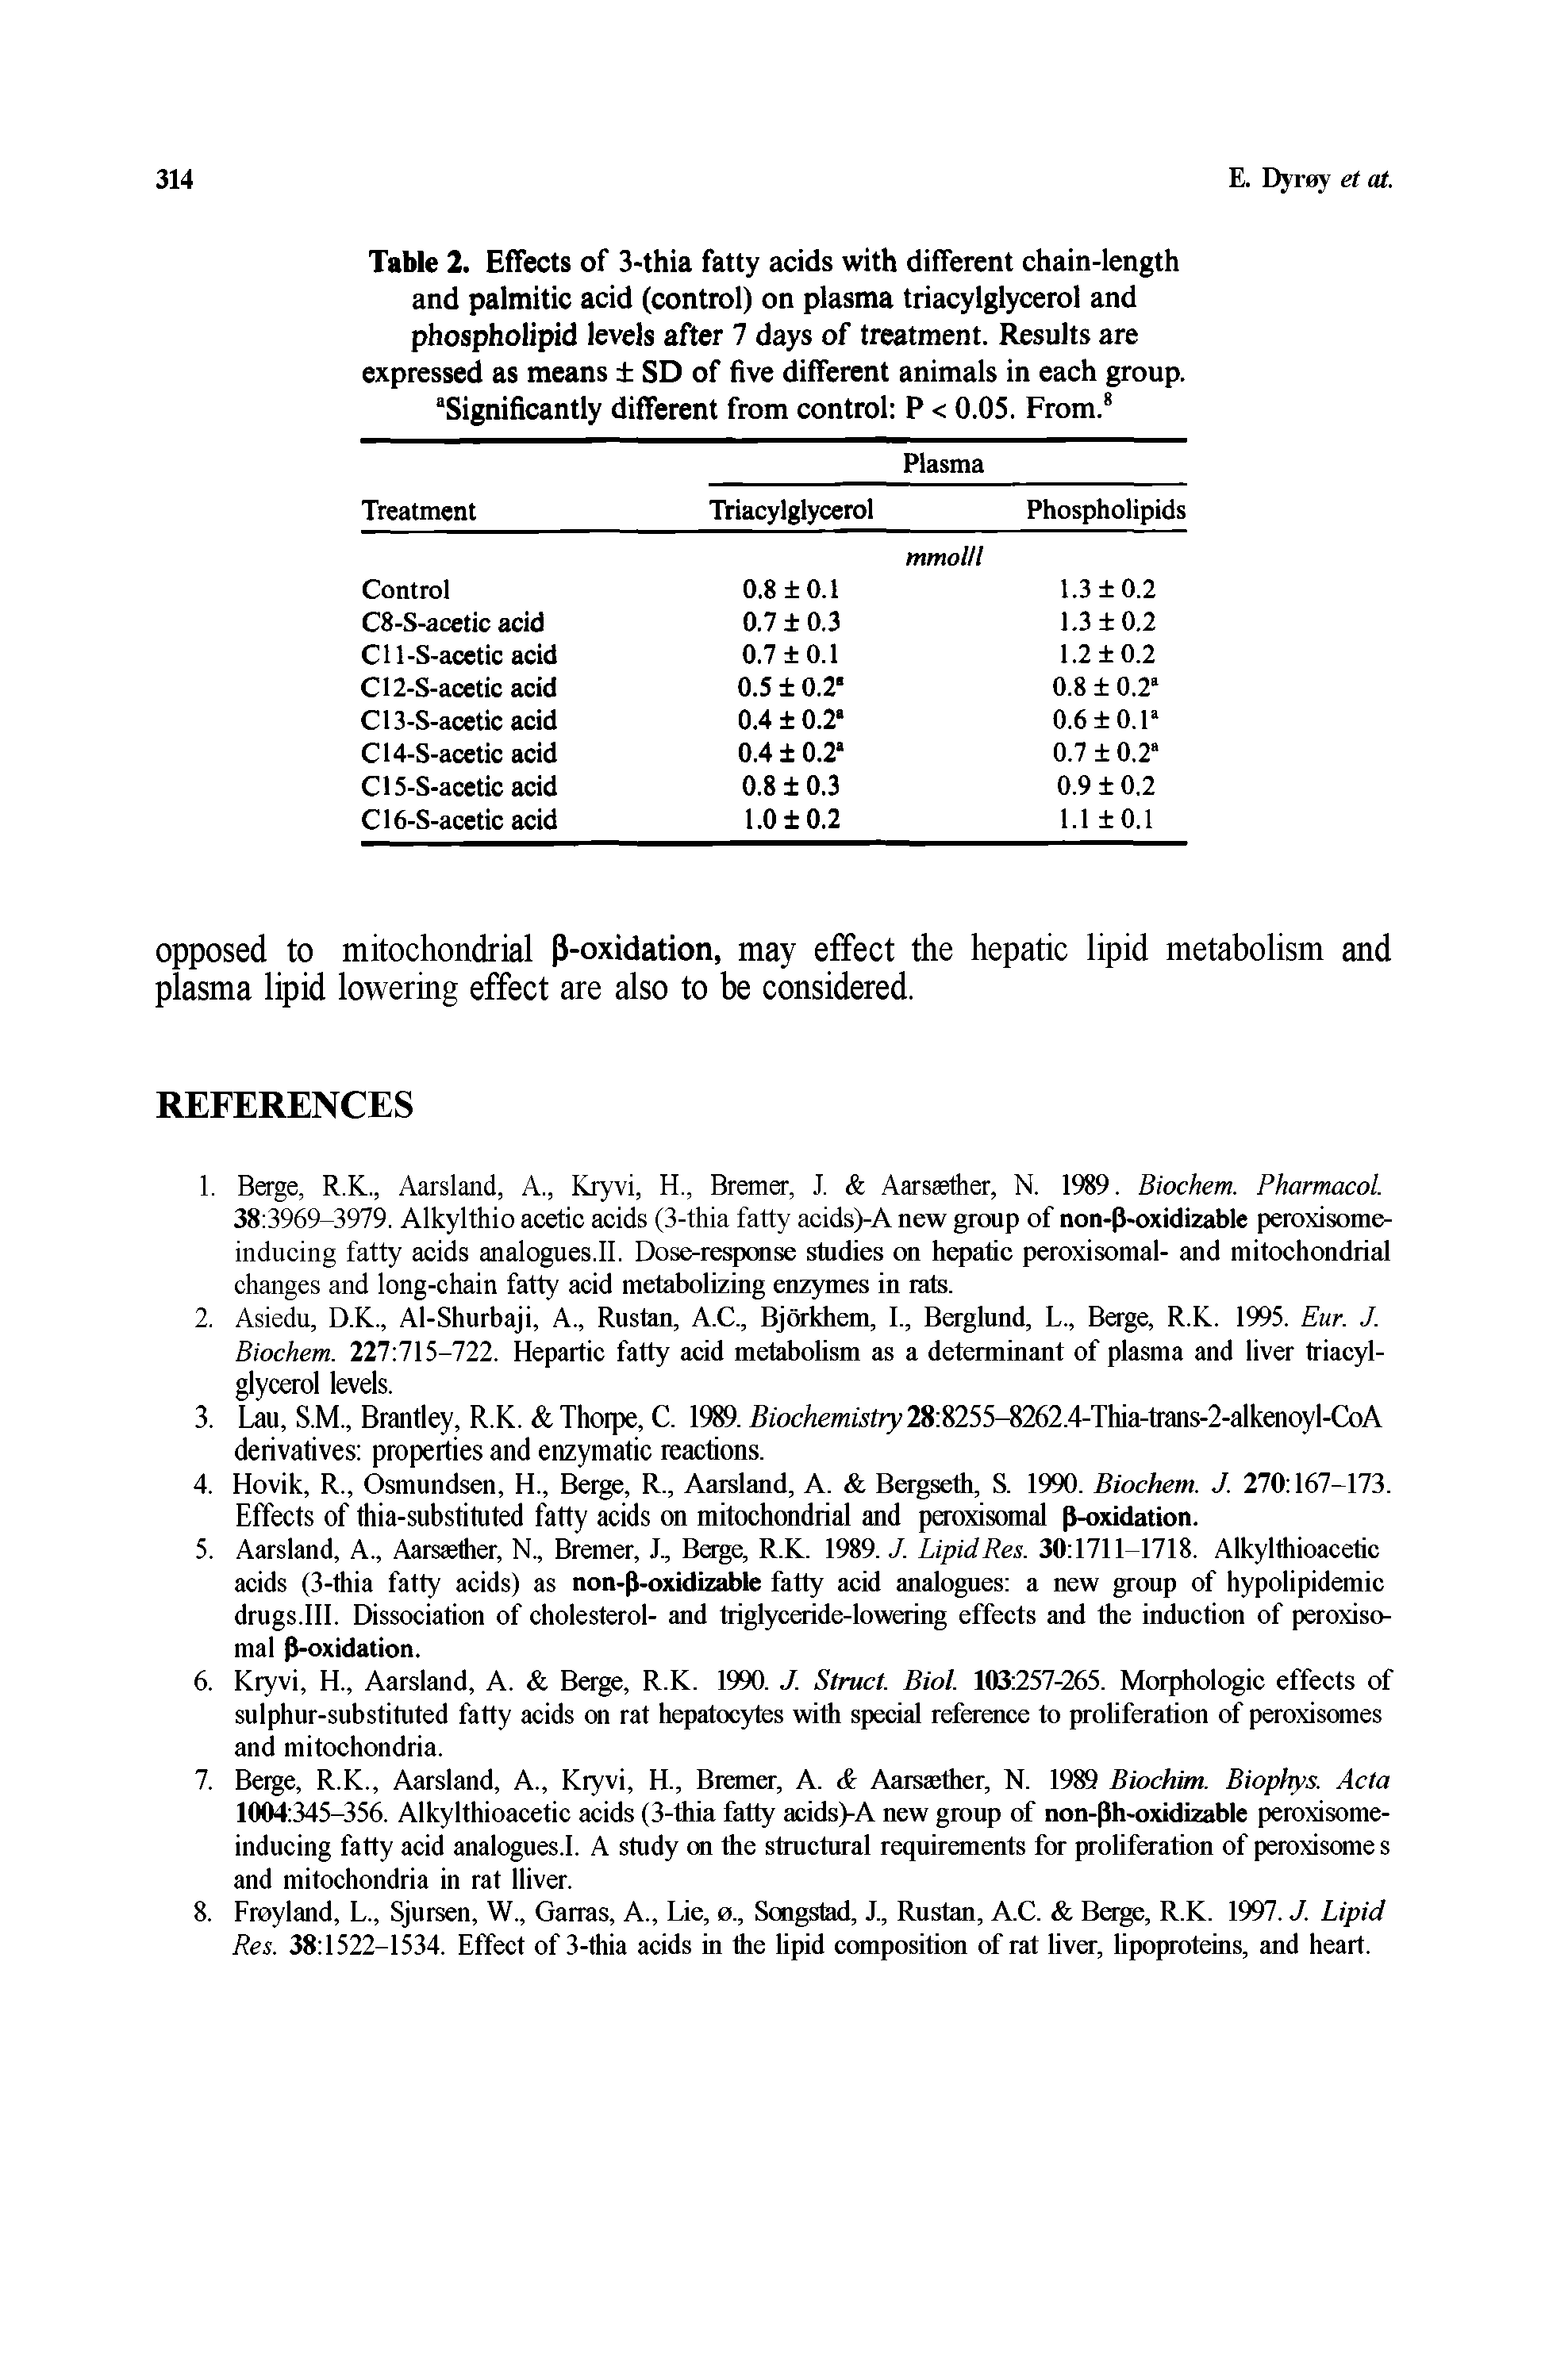 Table 2. Effects of 3-thia fatty acids with different chain-length and palmitic acid (control) on plasma triacylglycerol and phospholipid levels after 7 days of treatment. Results are expressed as means SD of five different animals in each group. Significantly different from control P < 0.05. From. ...